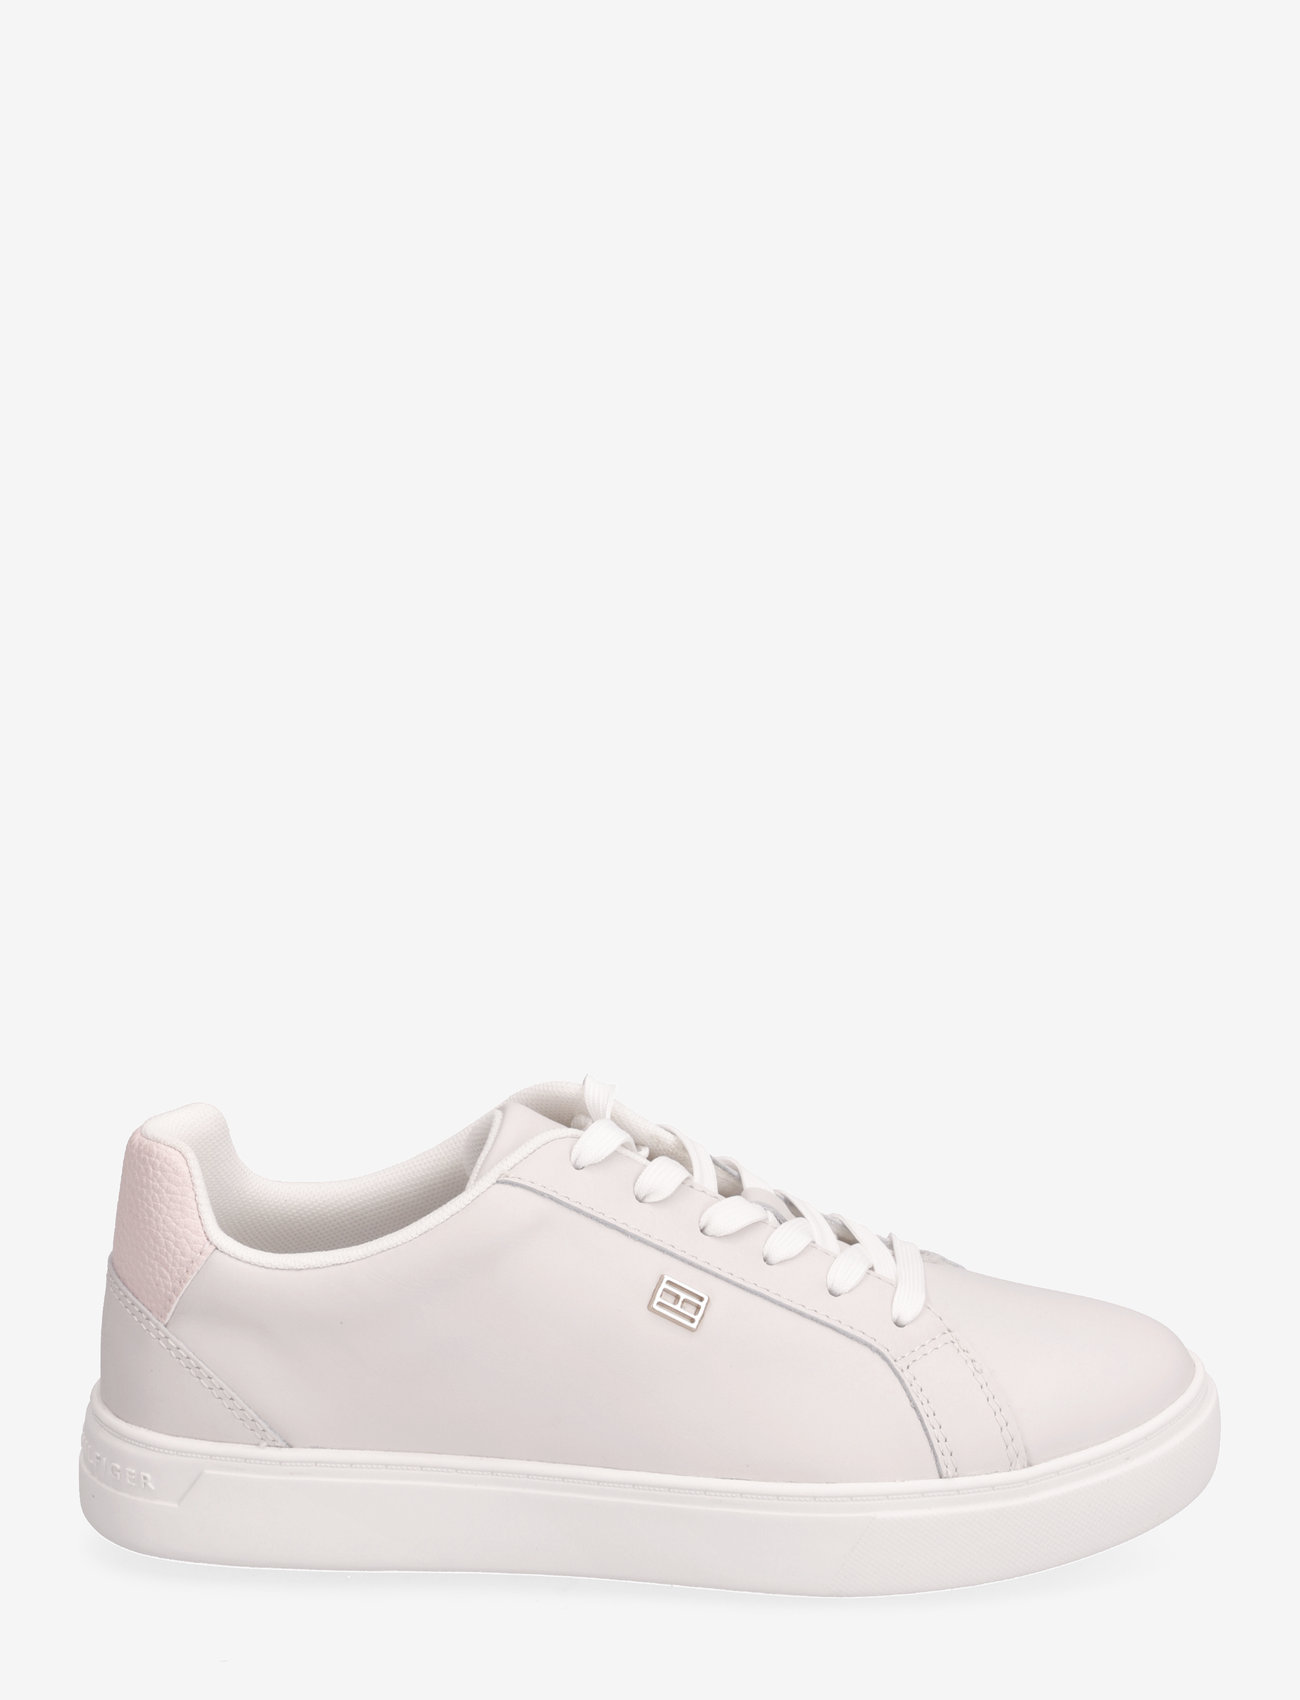 Tommy Hilfiger - ESSENTIAL COURT SNEAKER - low top sneakers - misty coast - 1